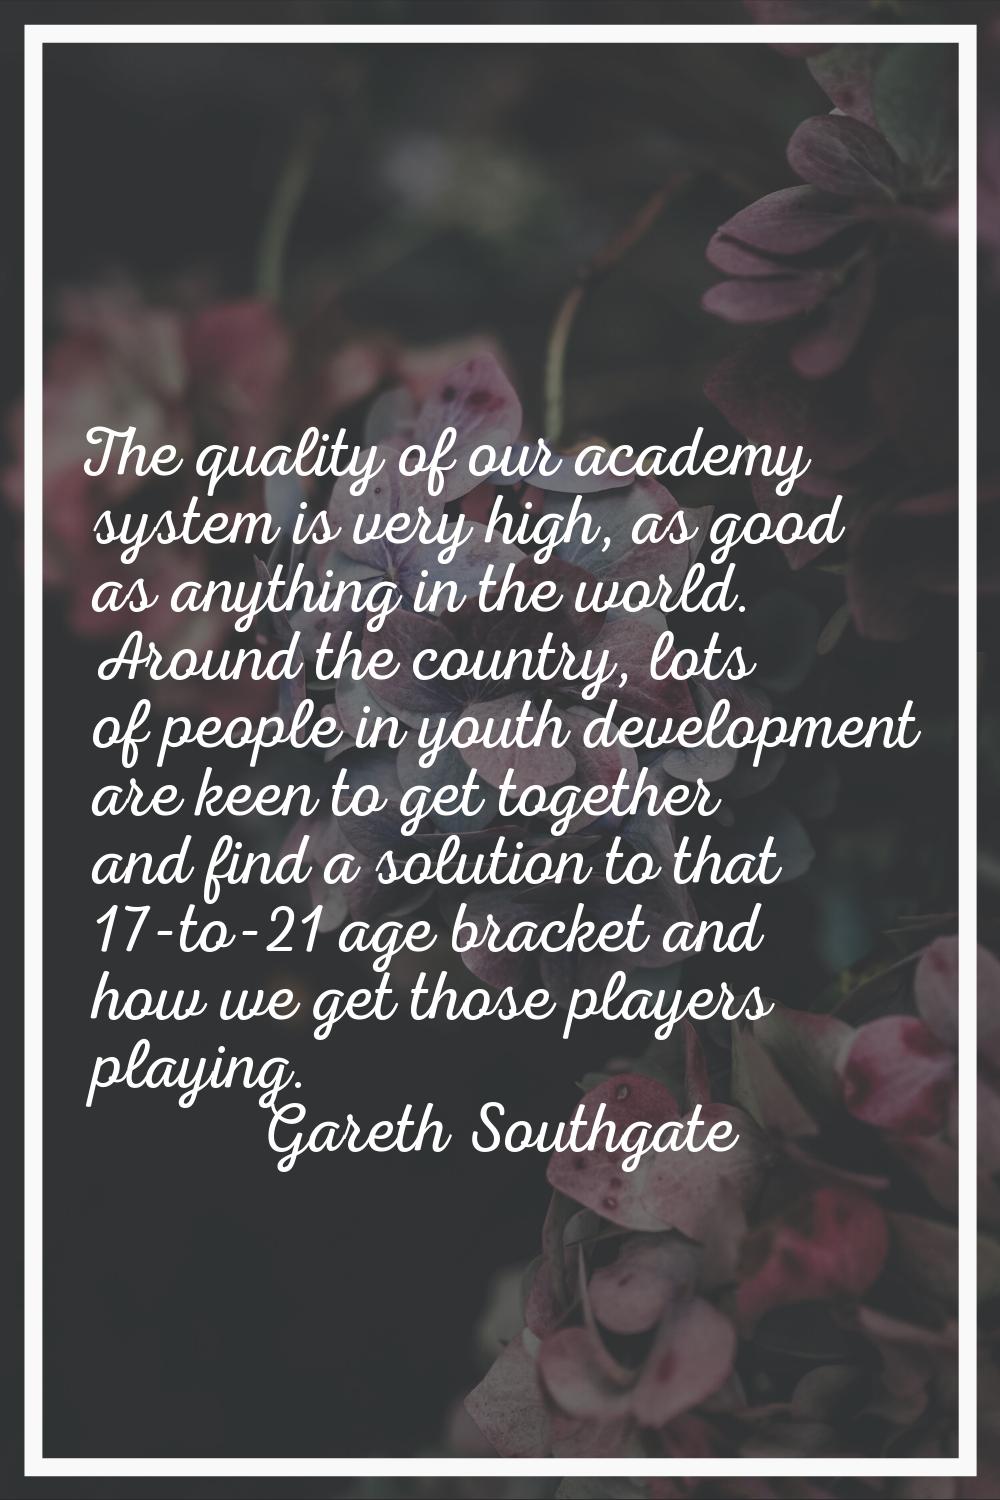 The quality of our academy system is very high, as good as anything in the world. Around the countr